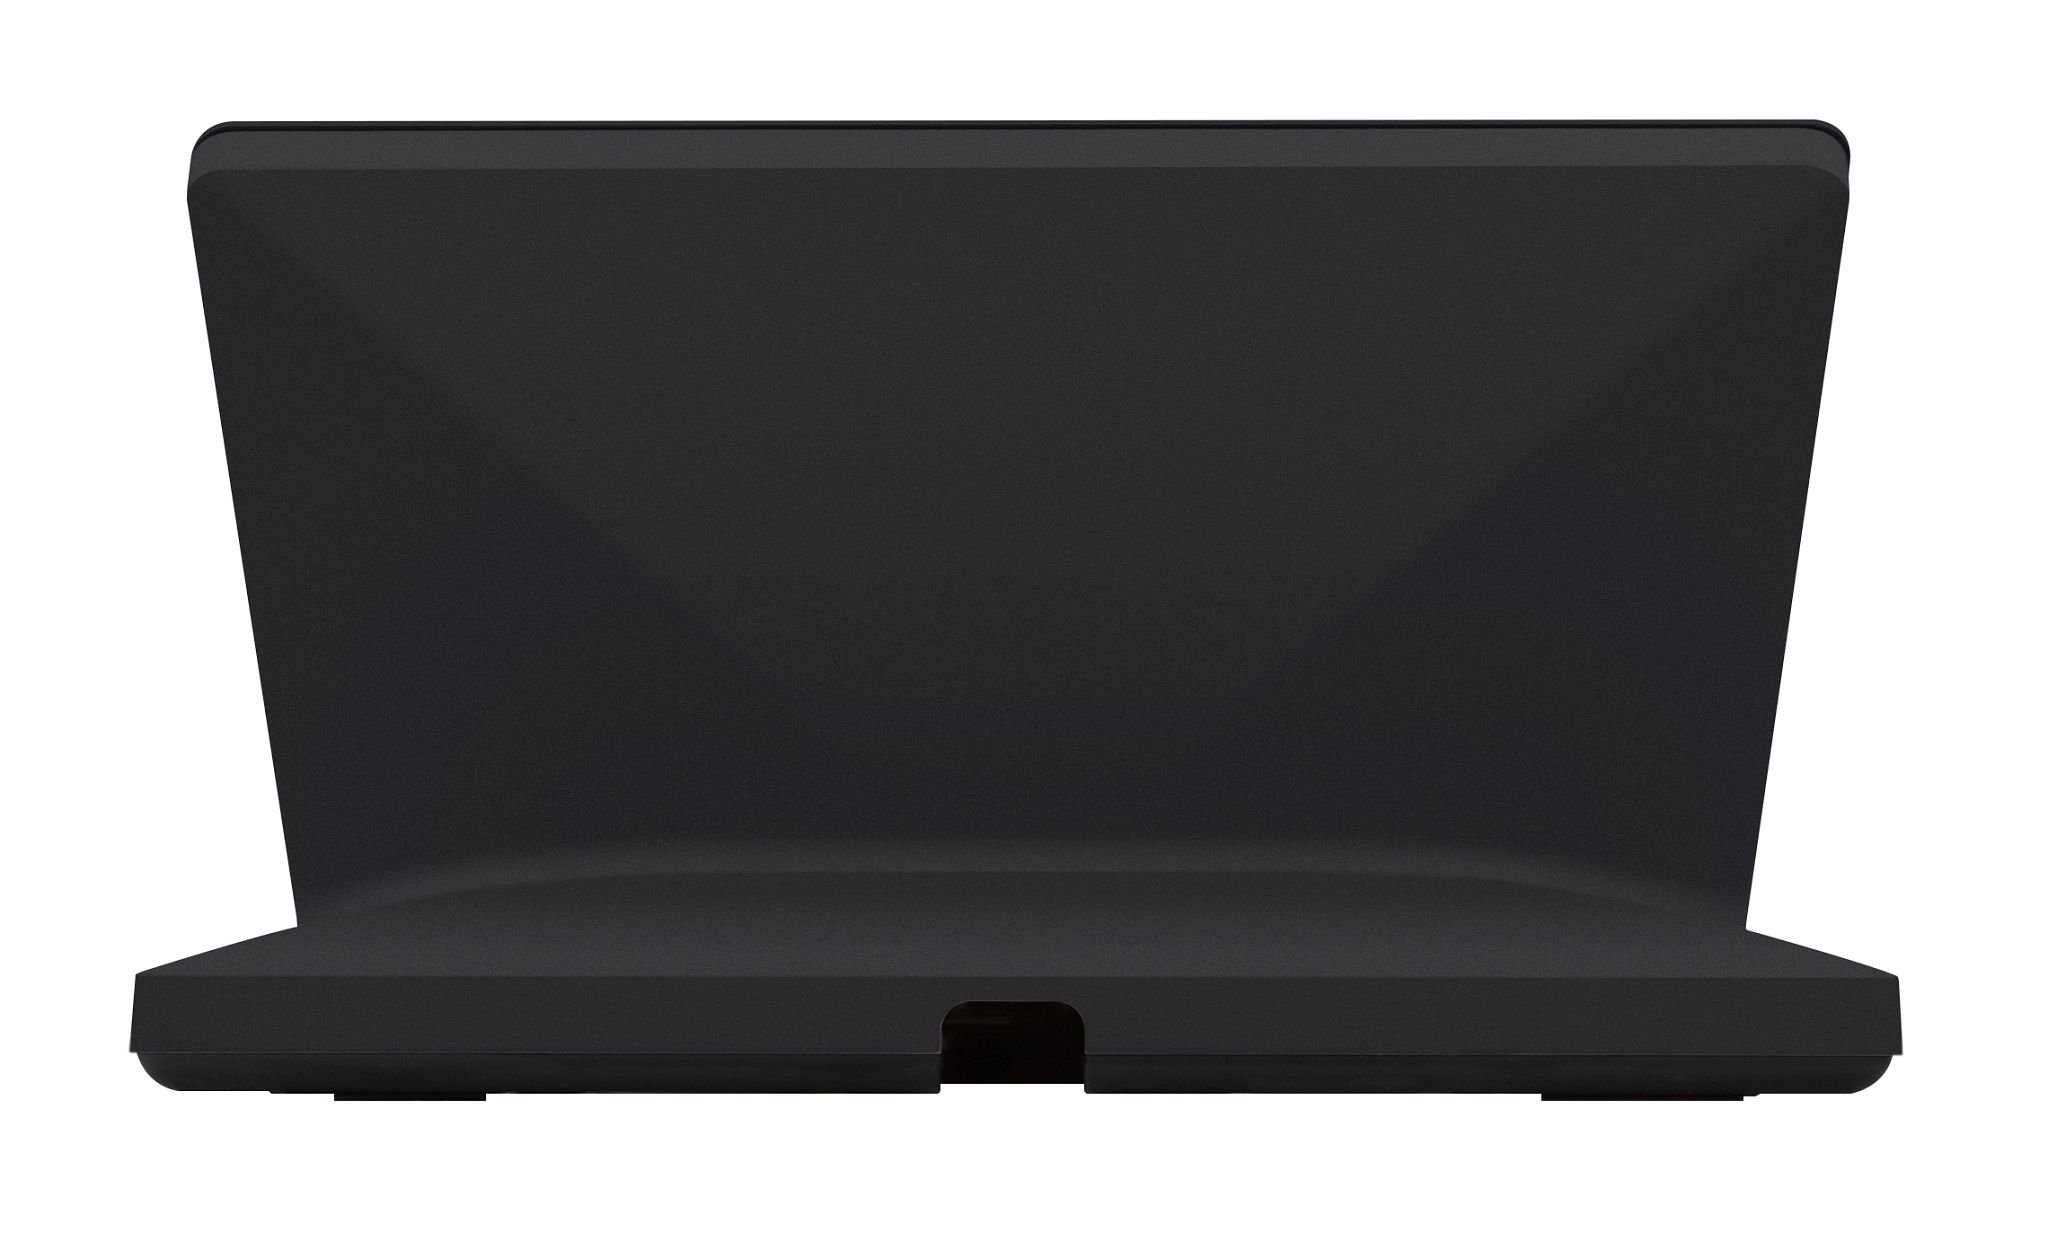 Crestron TS-770-B-S 7' Tabletop Touch Screen, Black Smooth